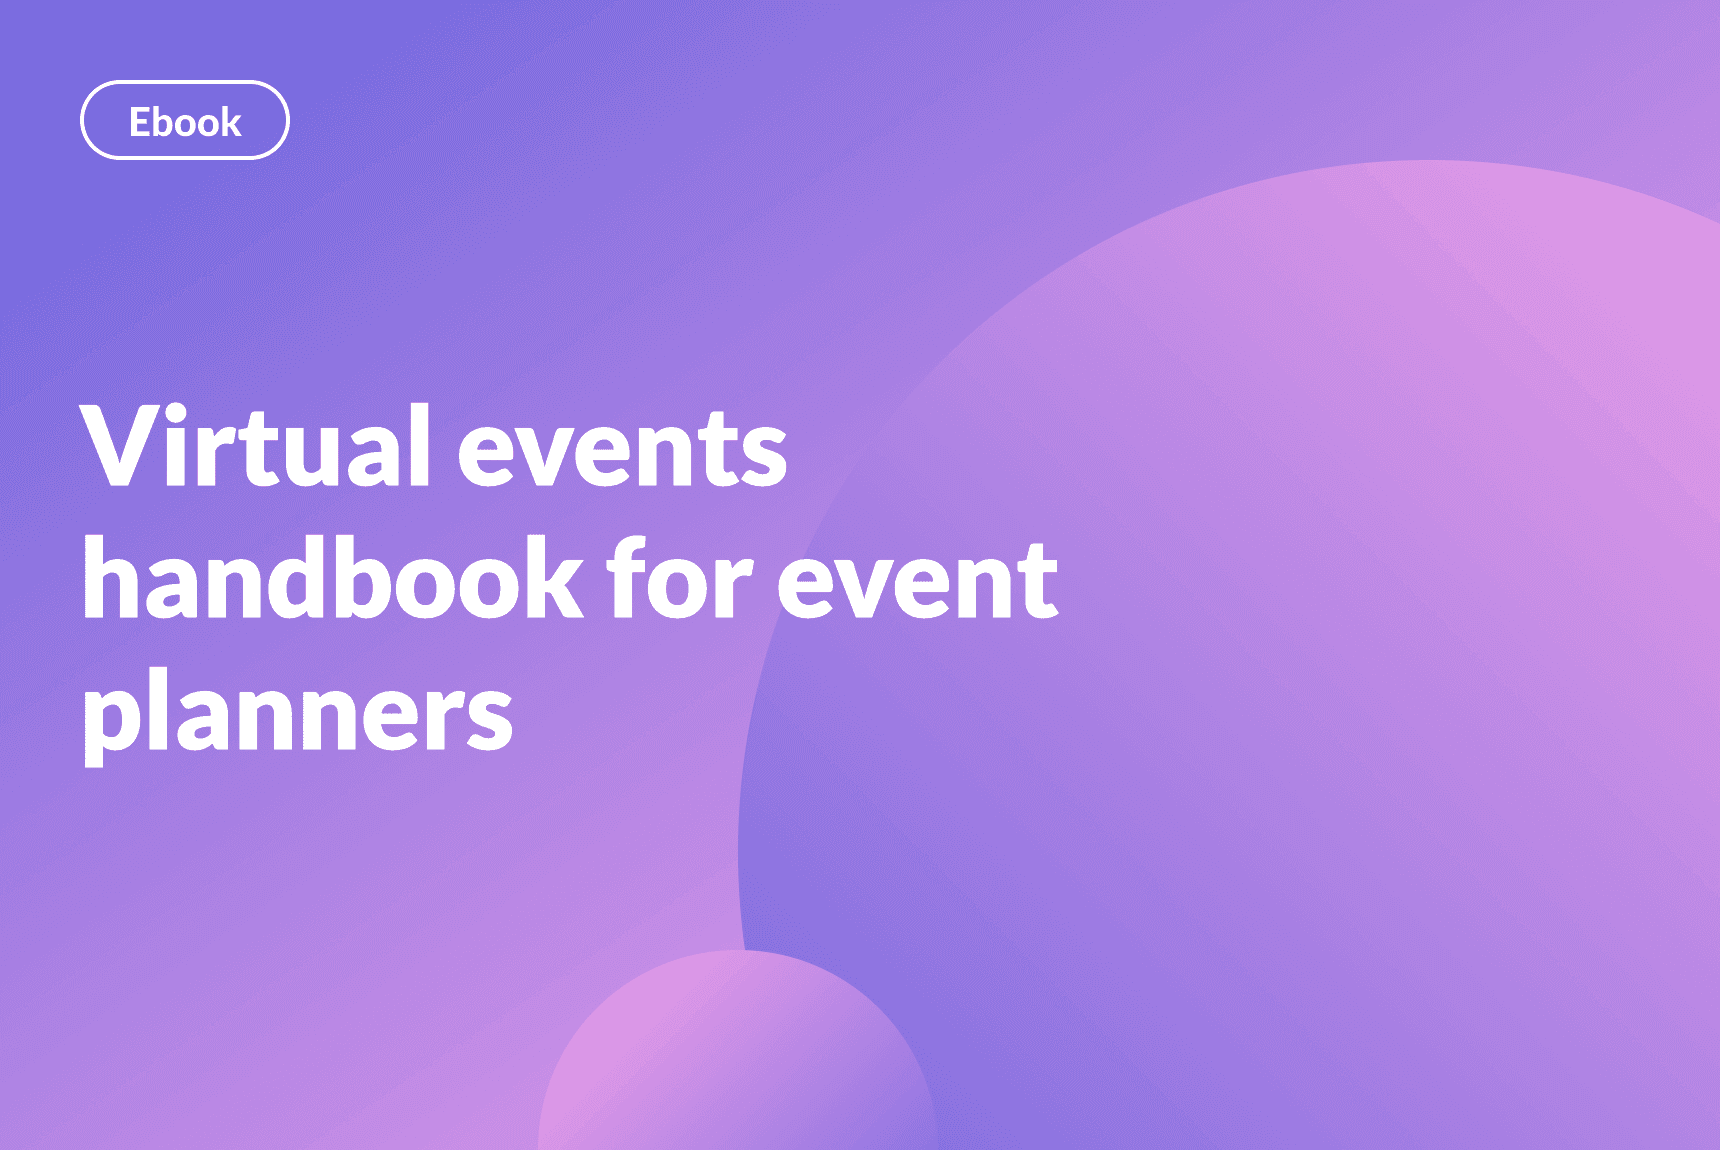 Virtual events handbook for event planners